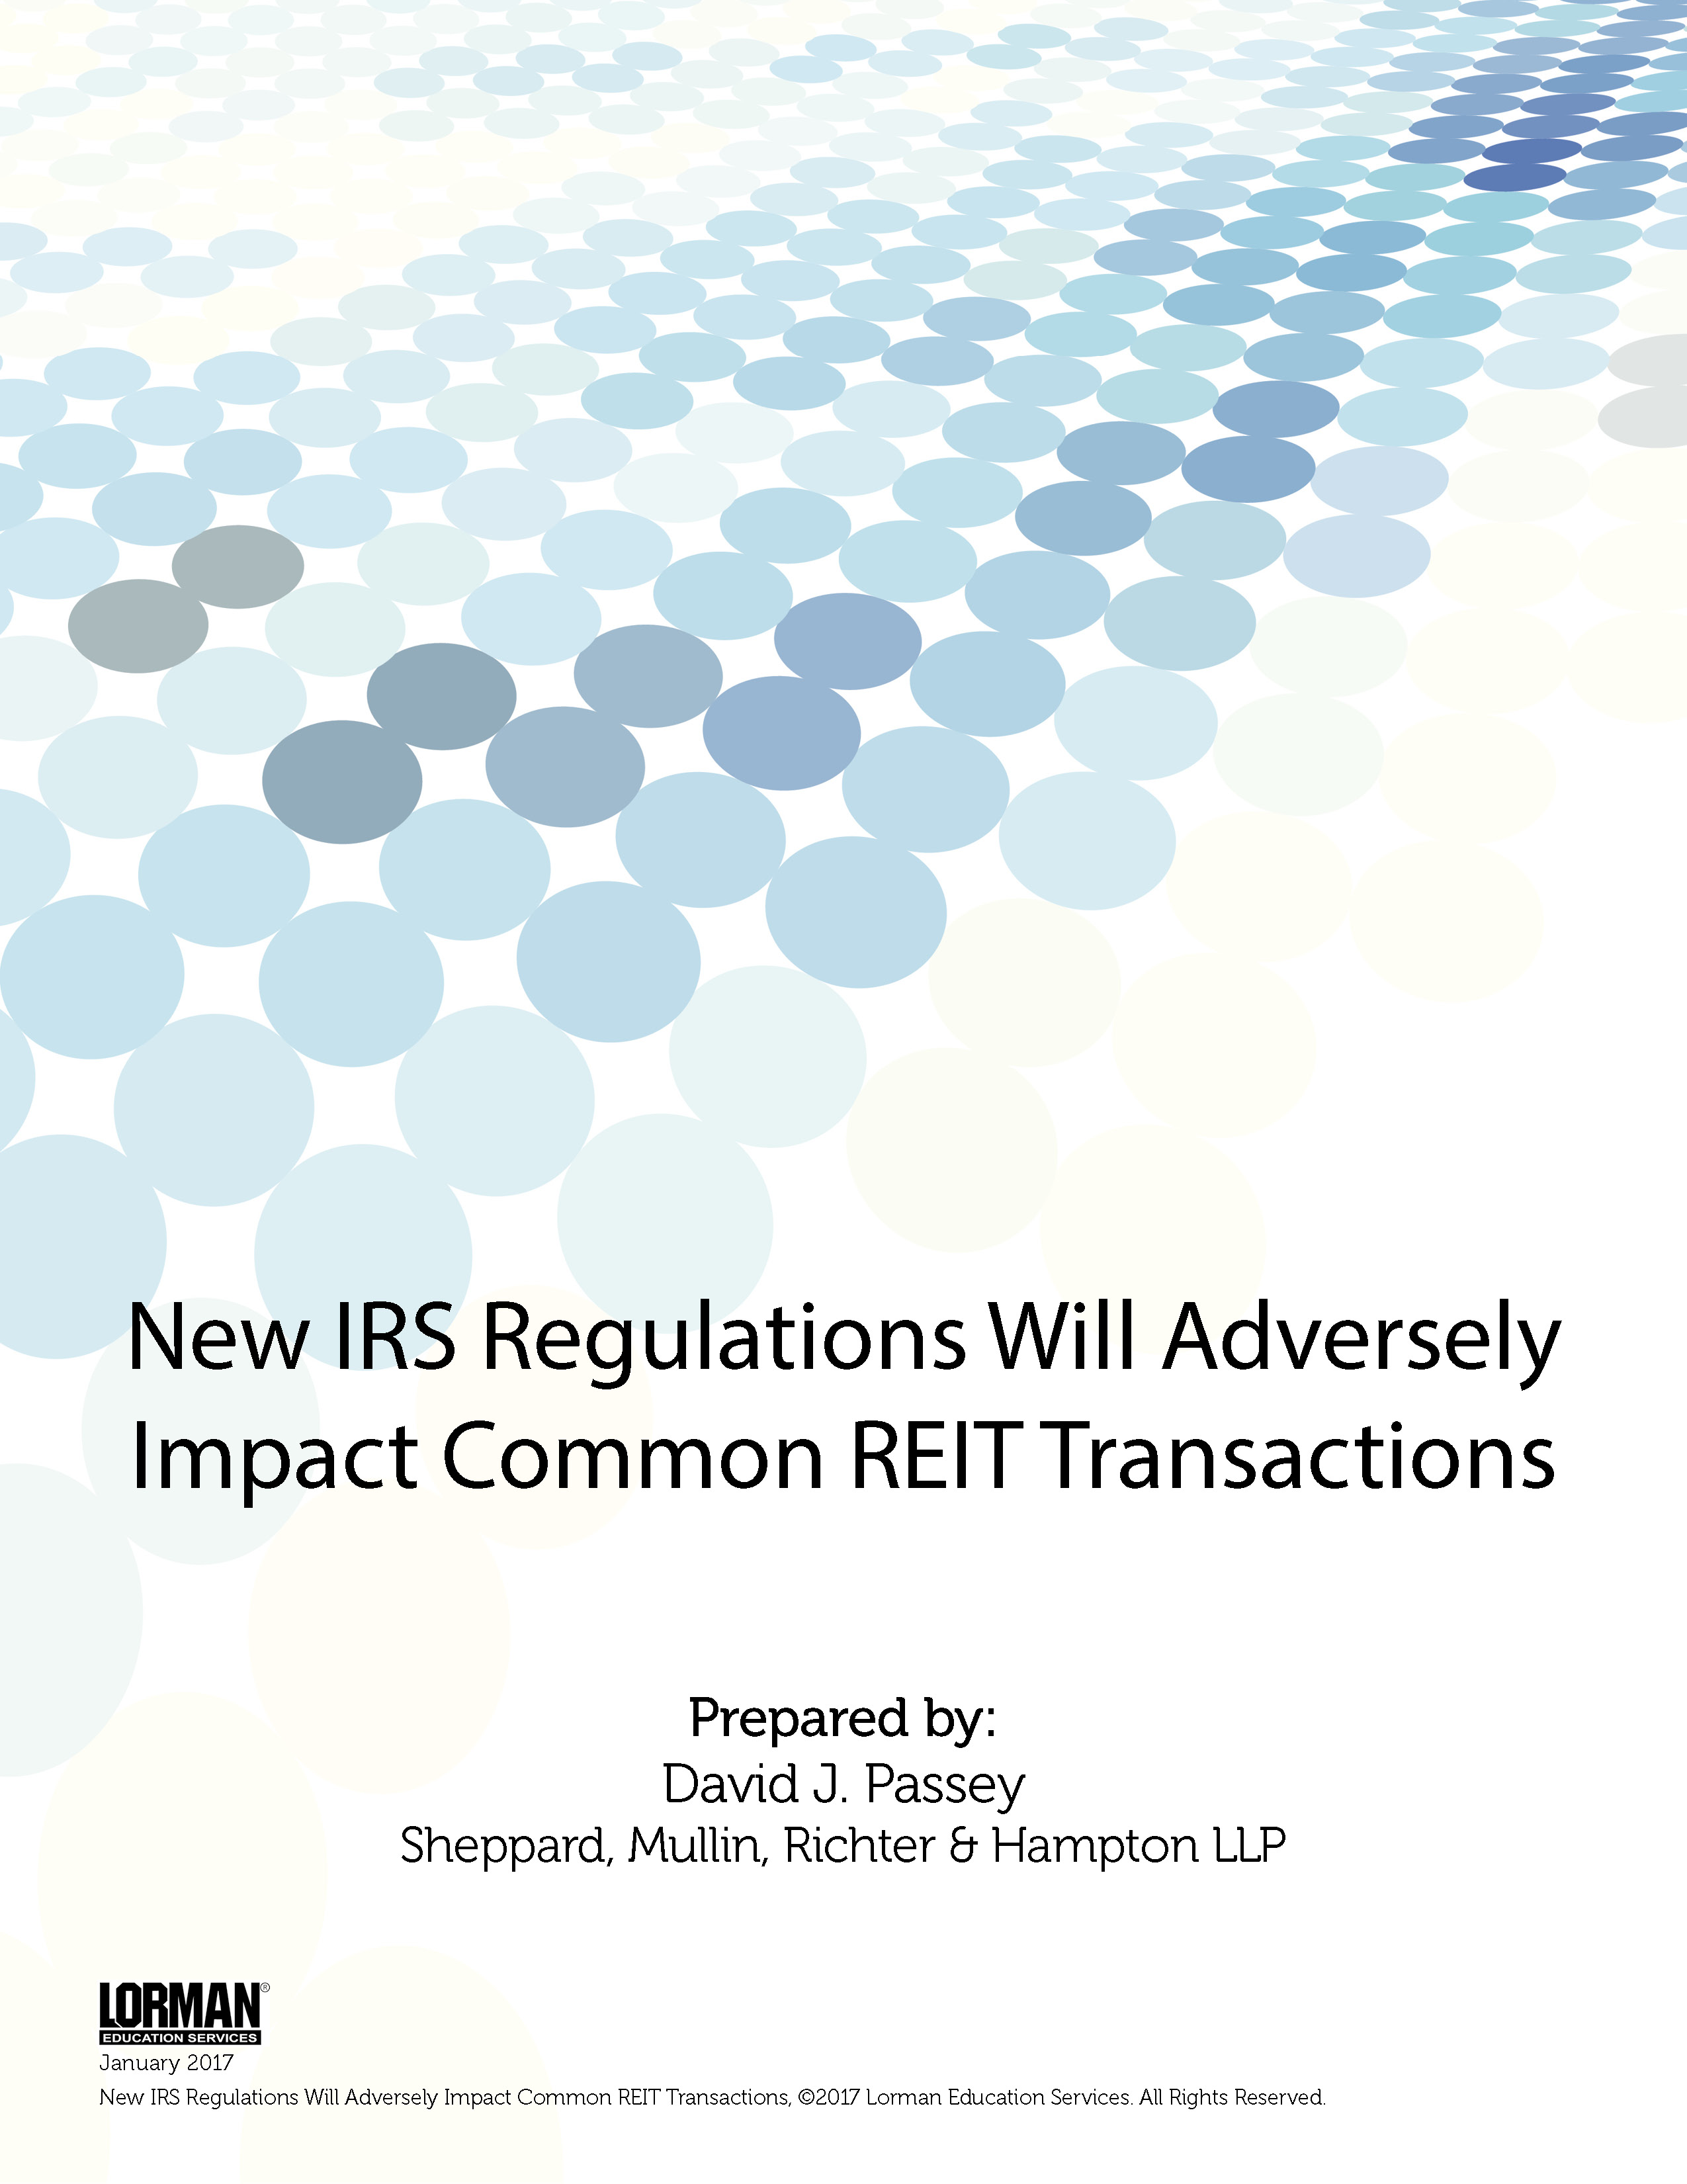 New IRS Regulations Will Adversely Impact Common REIT Transactions